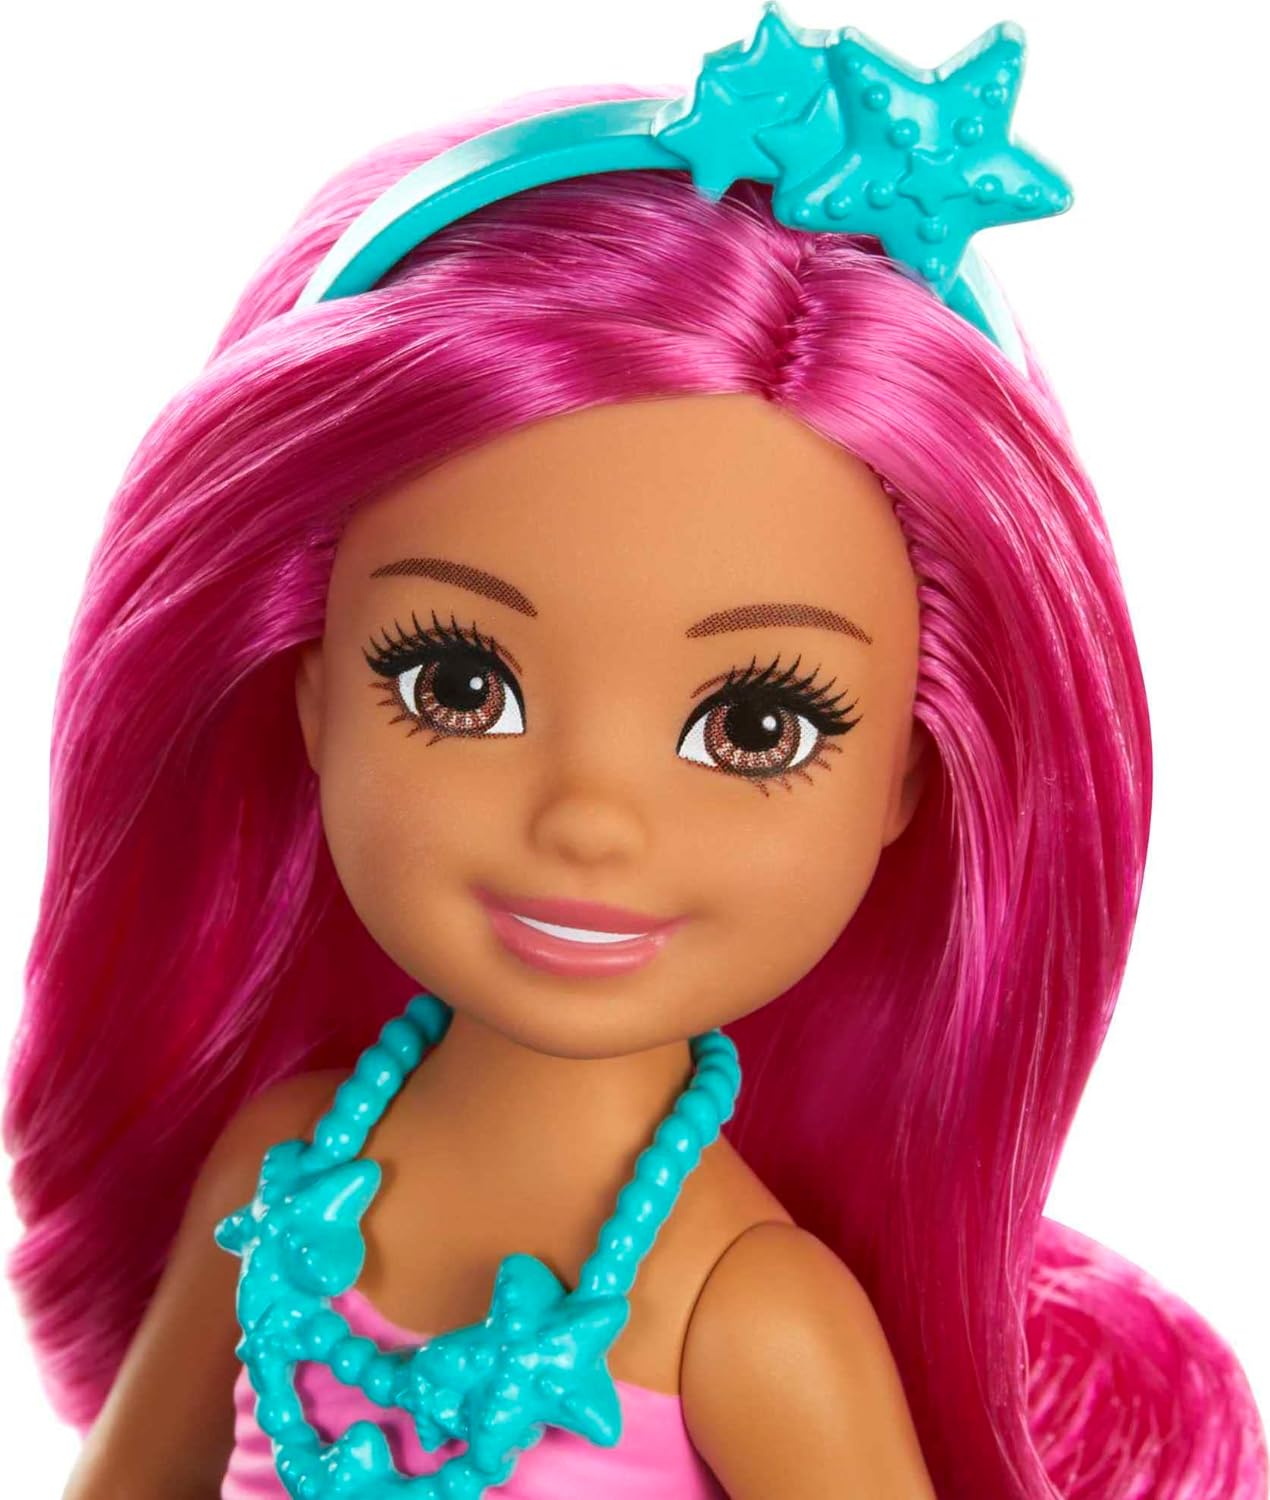 Barbie Dreamtopia Chelsea Mermaid Doll, 6.5-inch with Pink Hair and Tail